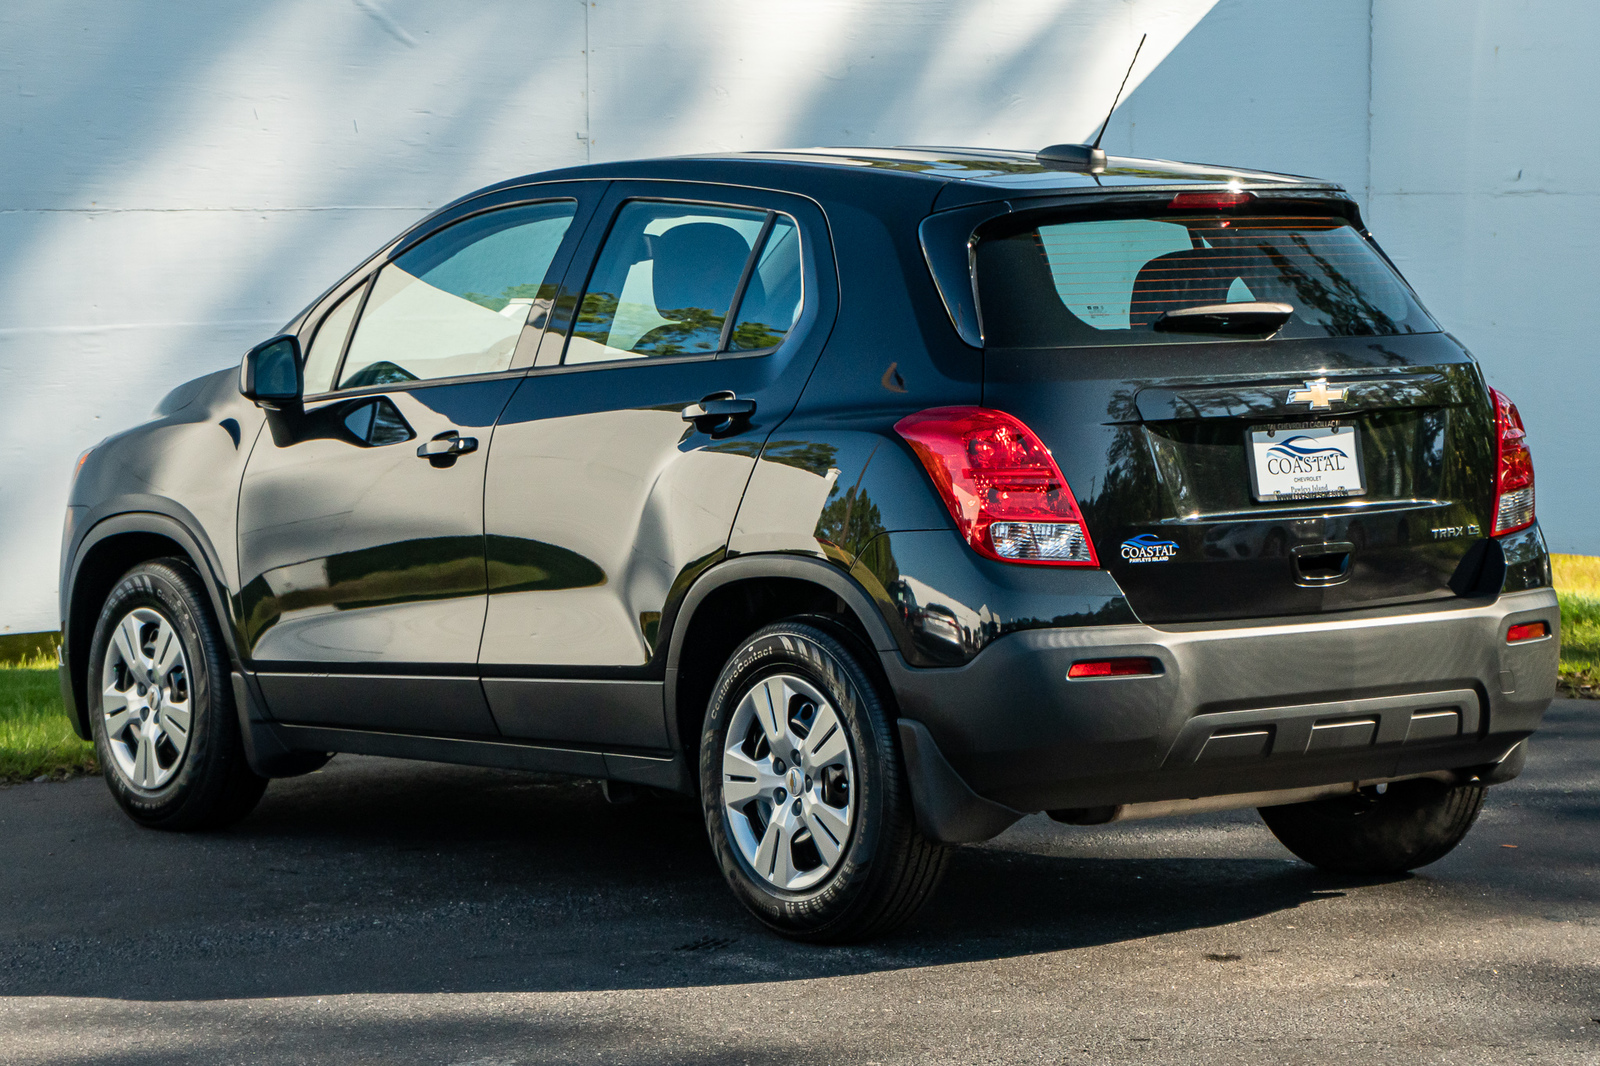 2016 chevrolet trax images